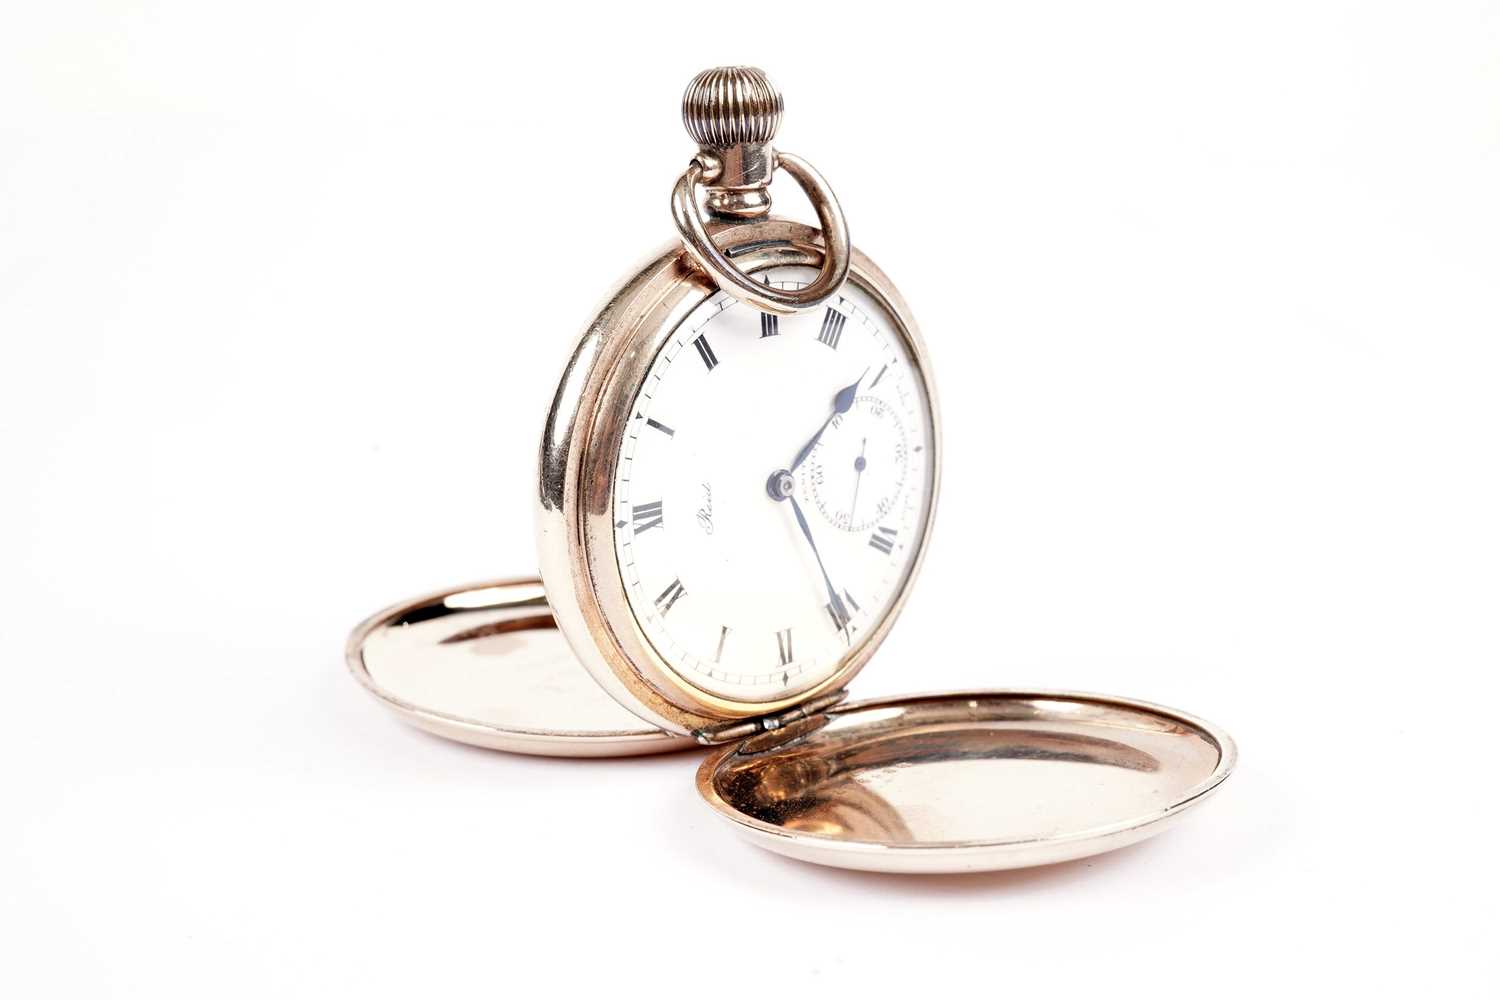 An antique gold-plated Zenith hunter pocket watch retailed by Reid & Sons